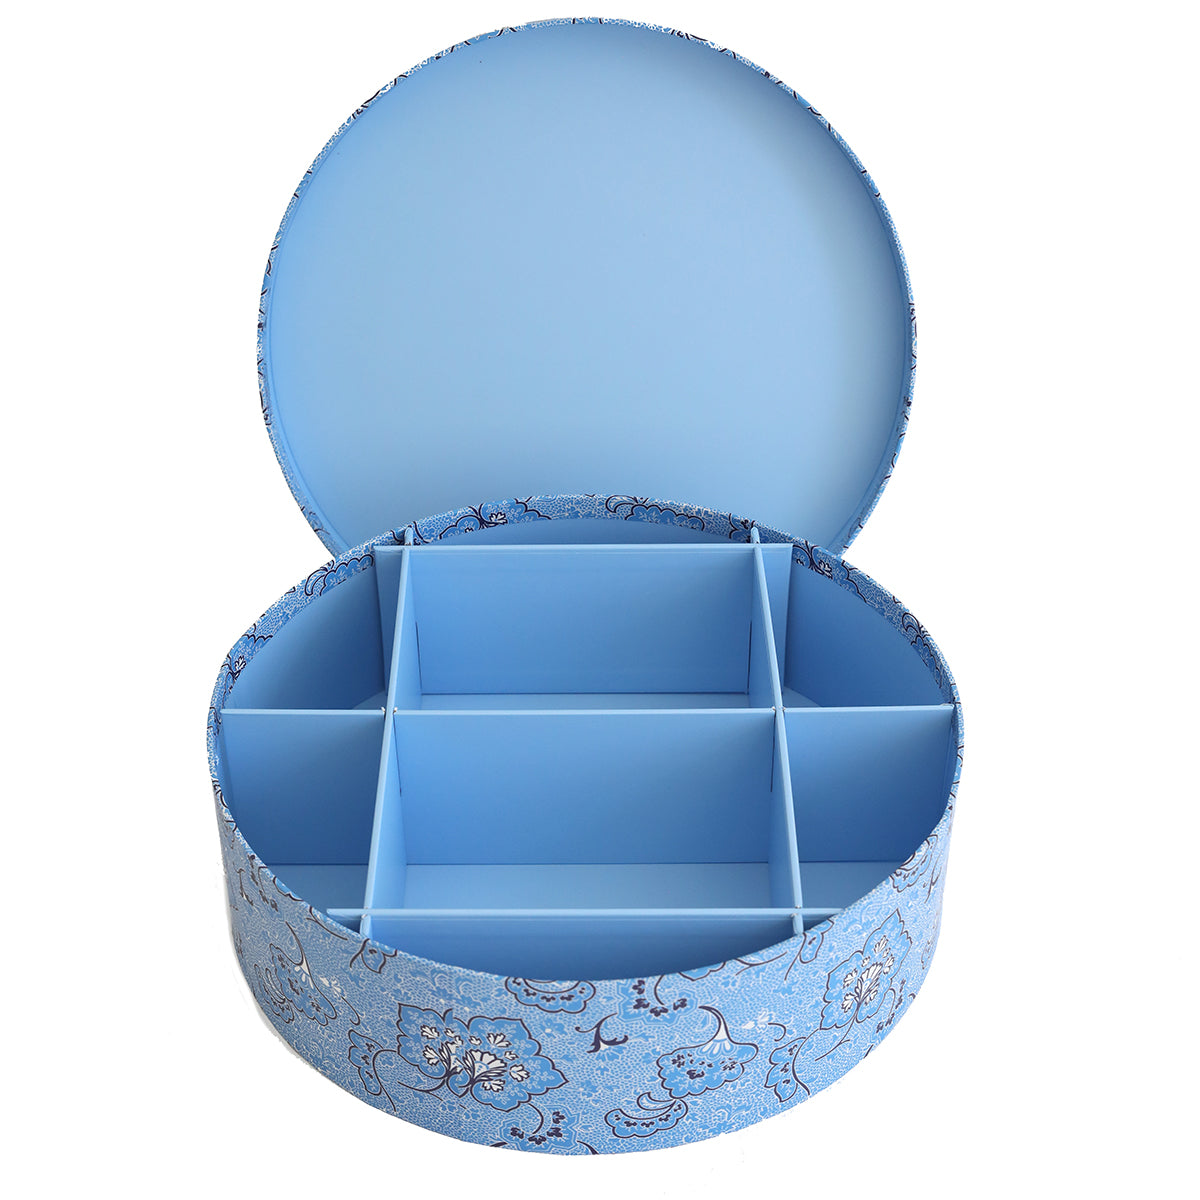 A Canton Bleu Hat Box Storage with four compartments for hat storage.